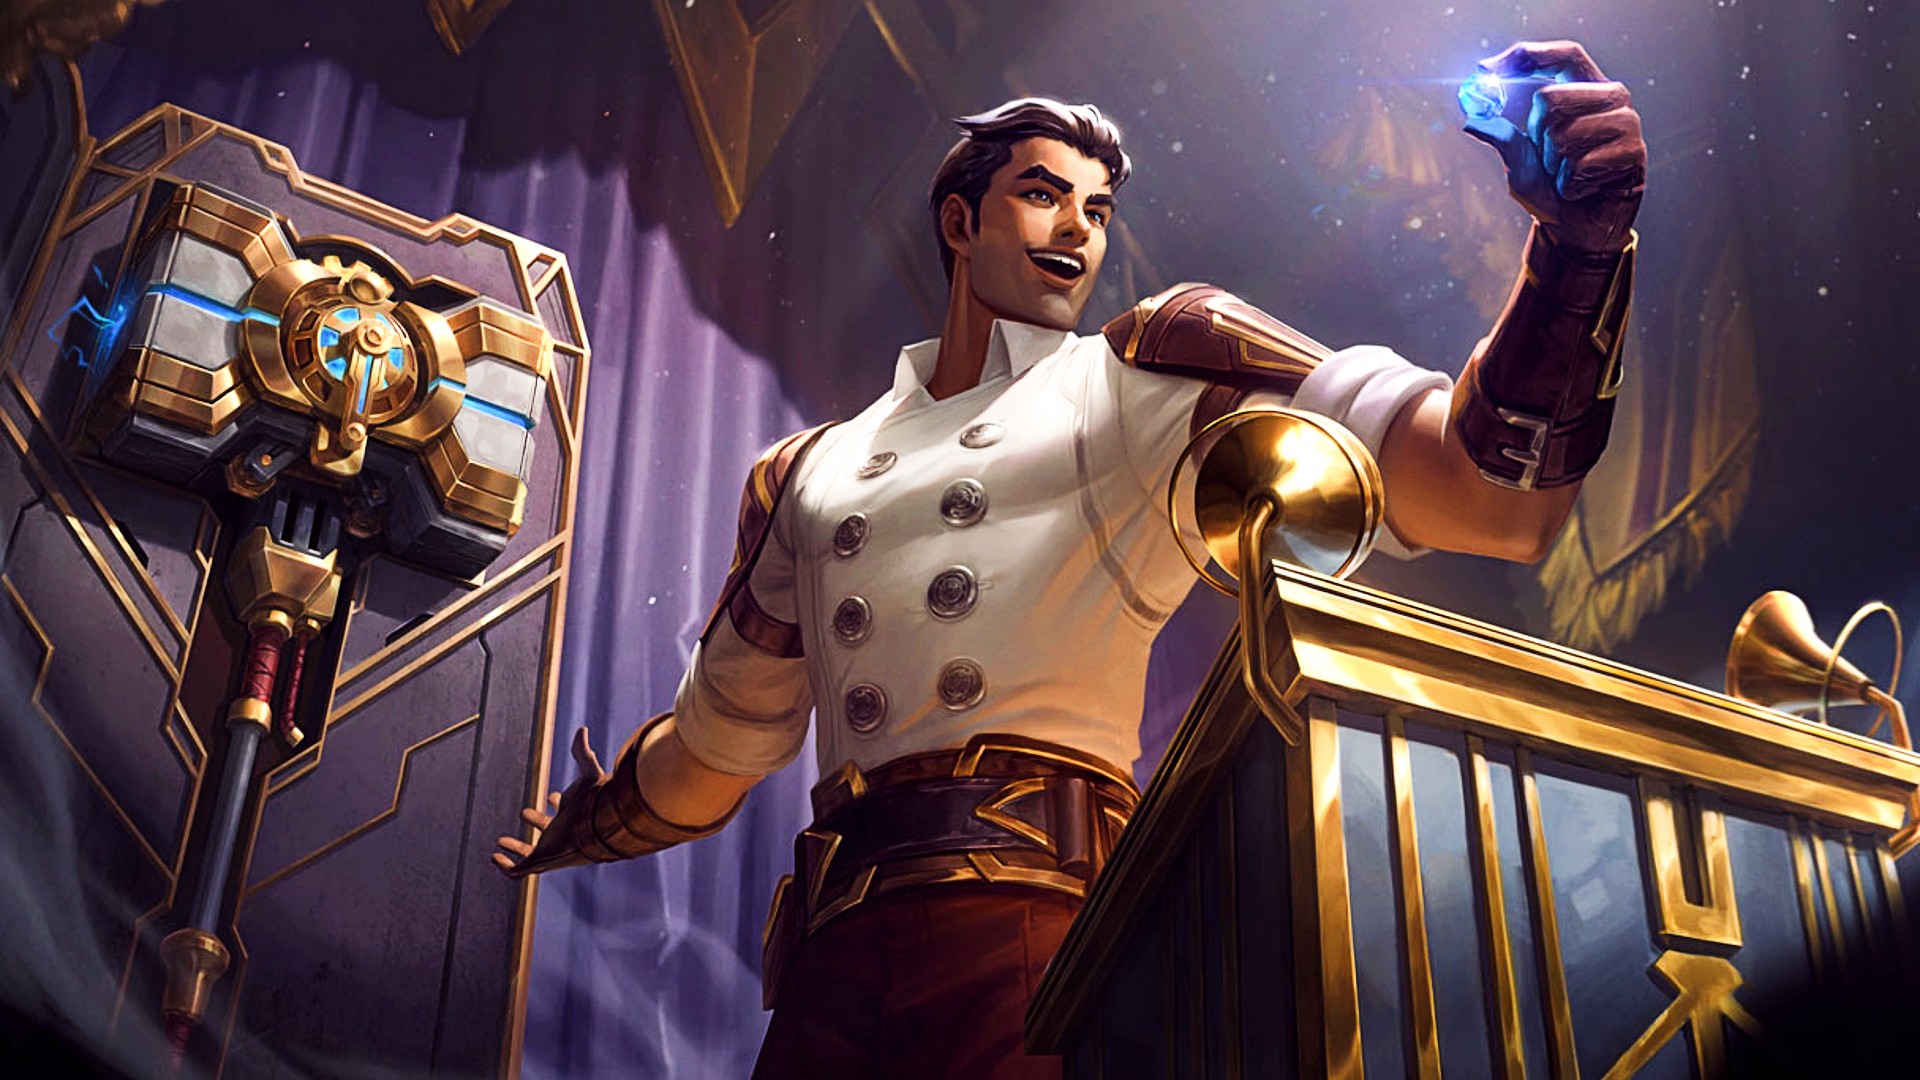 League of Legends' next Arcane content adds a “new interactive experience”